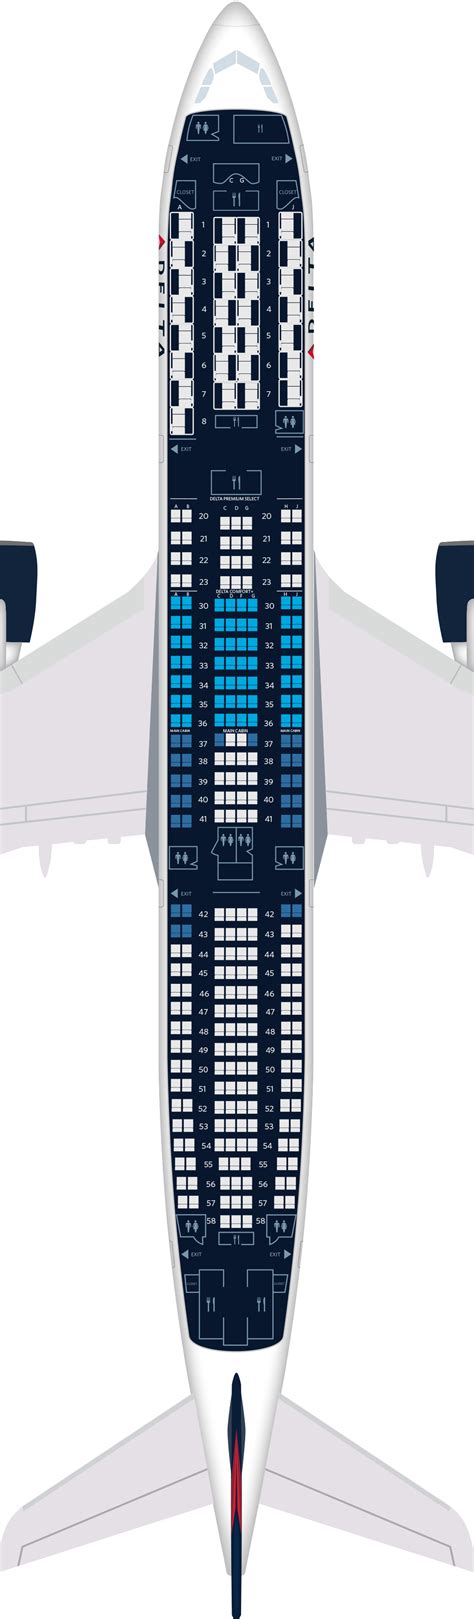 Airbus A330 900neo Seat Map Delta Image To U